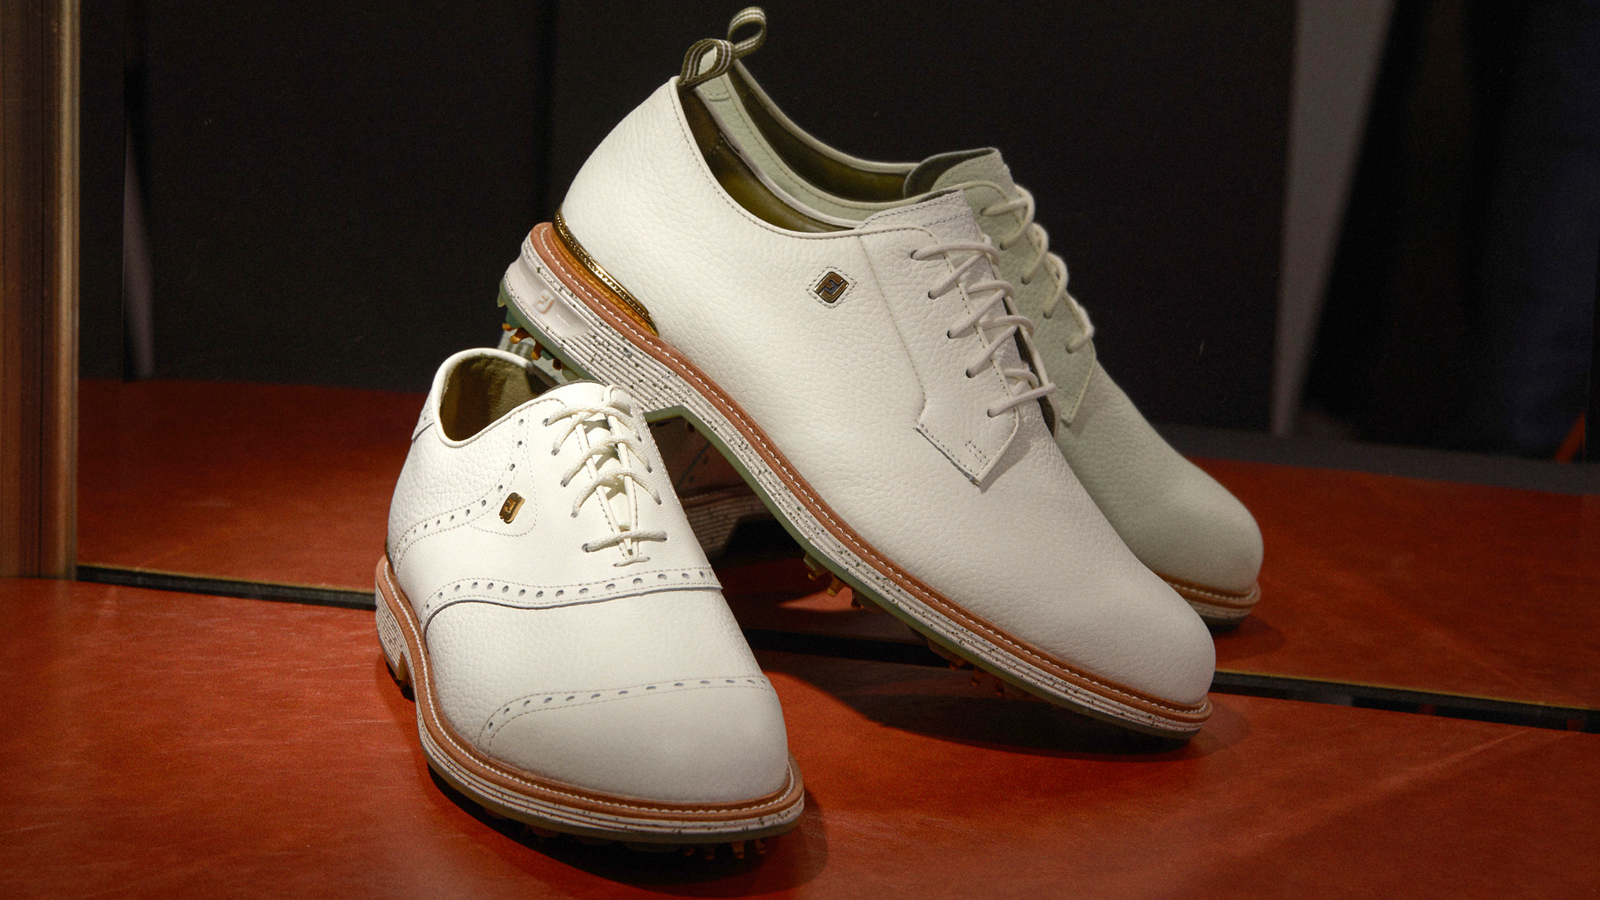 FootJoy, Garrett Leight collaborate to release golf shoes and eyewear